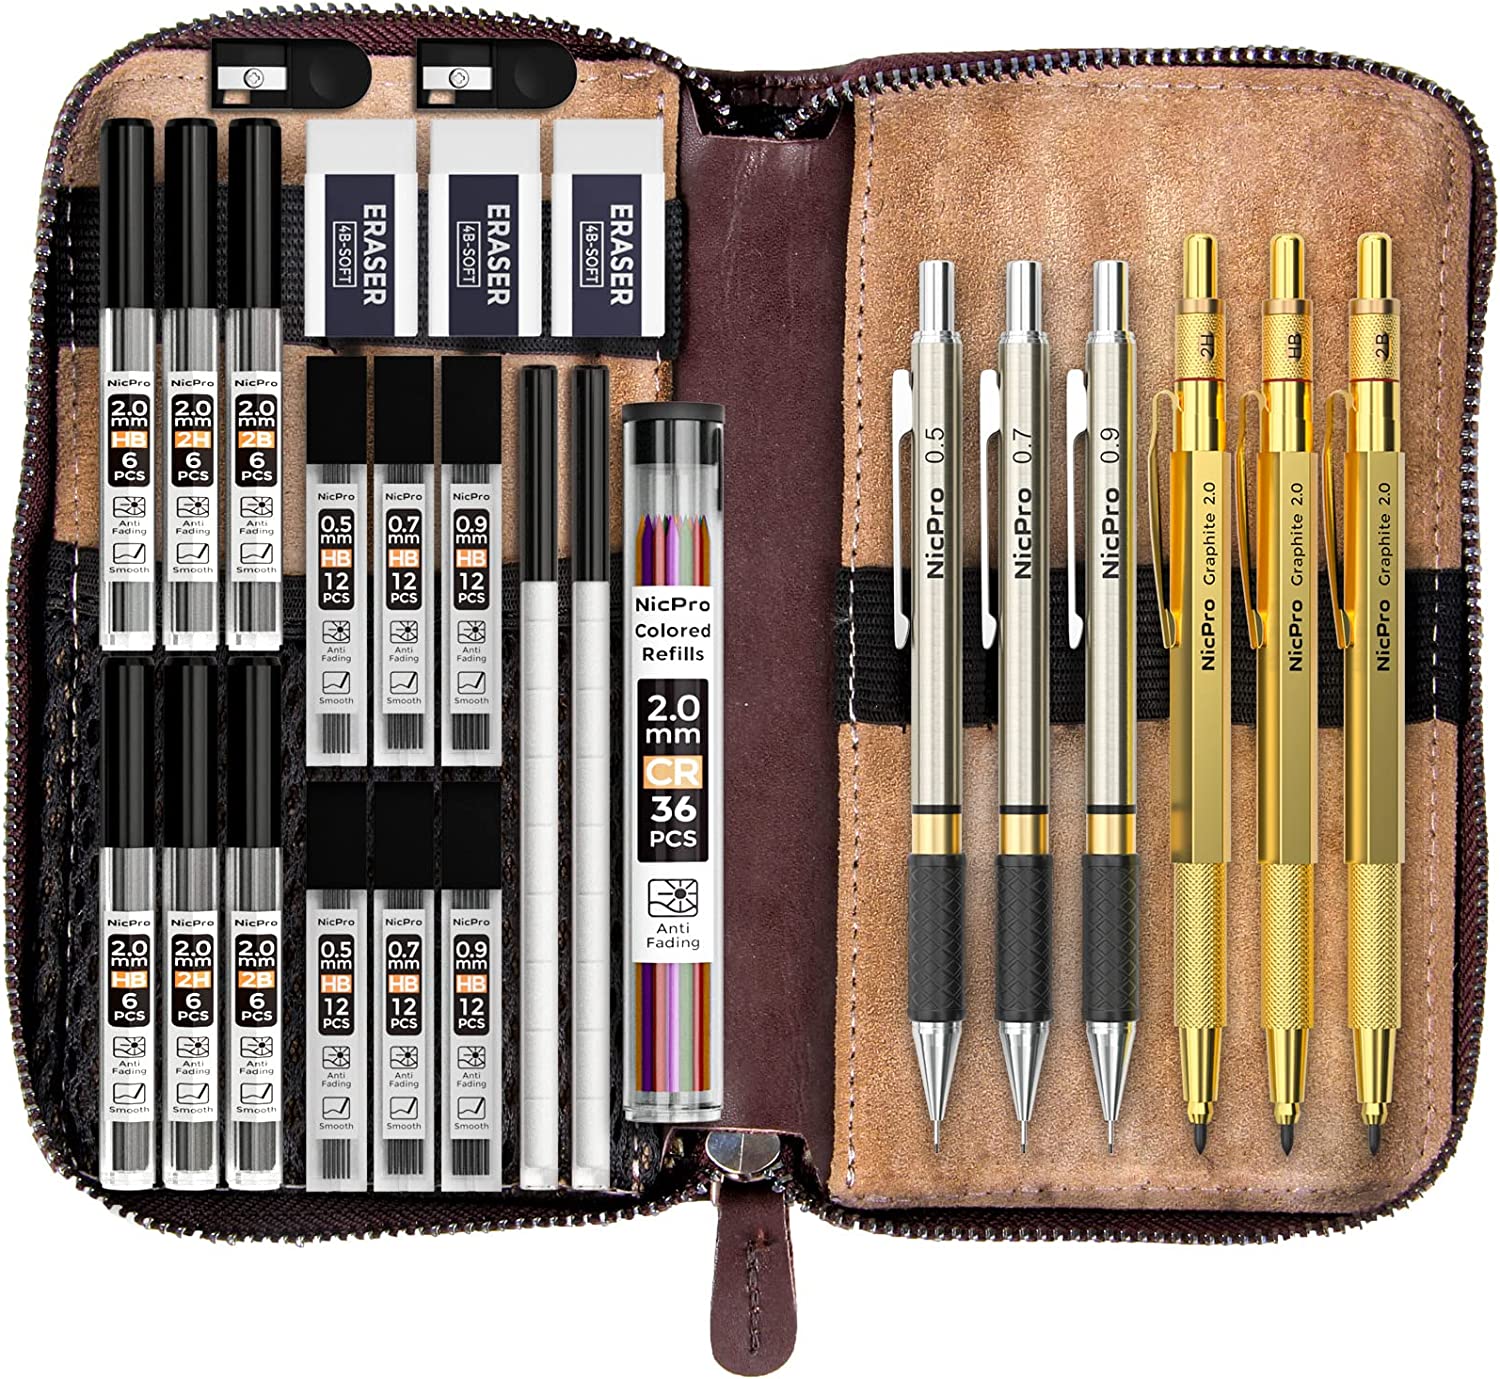 Nicpro 6 Pcs Art Mechanical Pencils Set with Case, Drafting Pencil 0.3 & 0.5 & 0.7 & 0.9 mm and 2mm Lead Holder (4B 2B HB 2H) for Art Writing